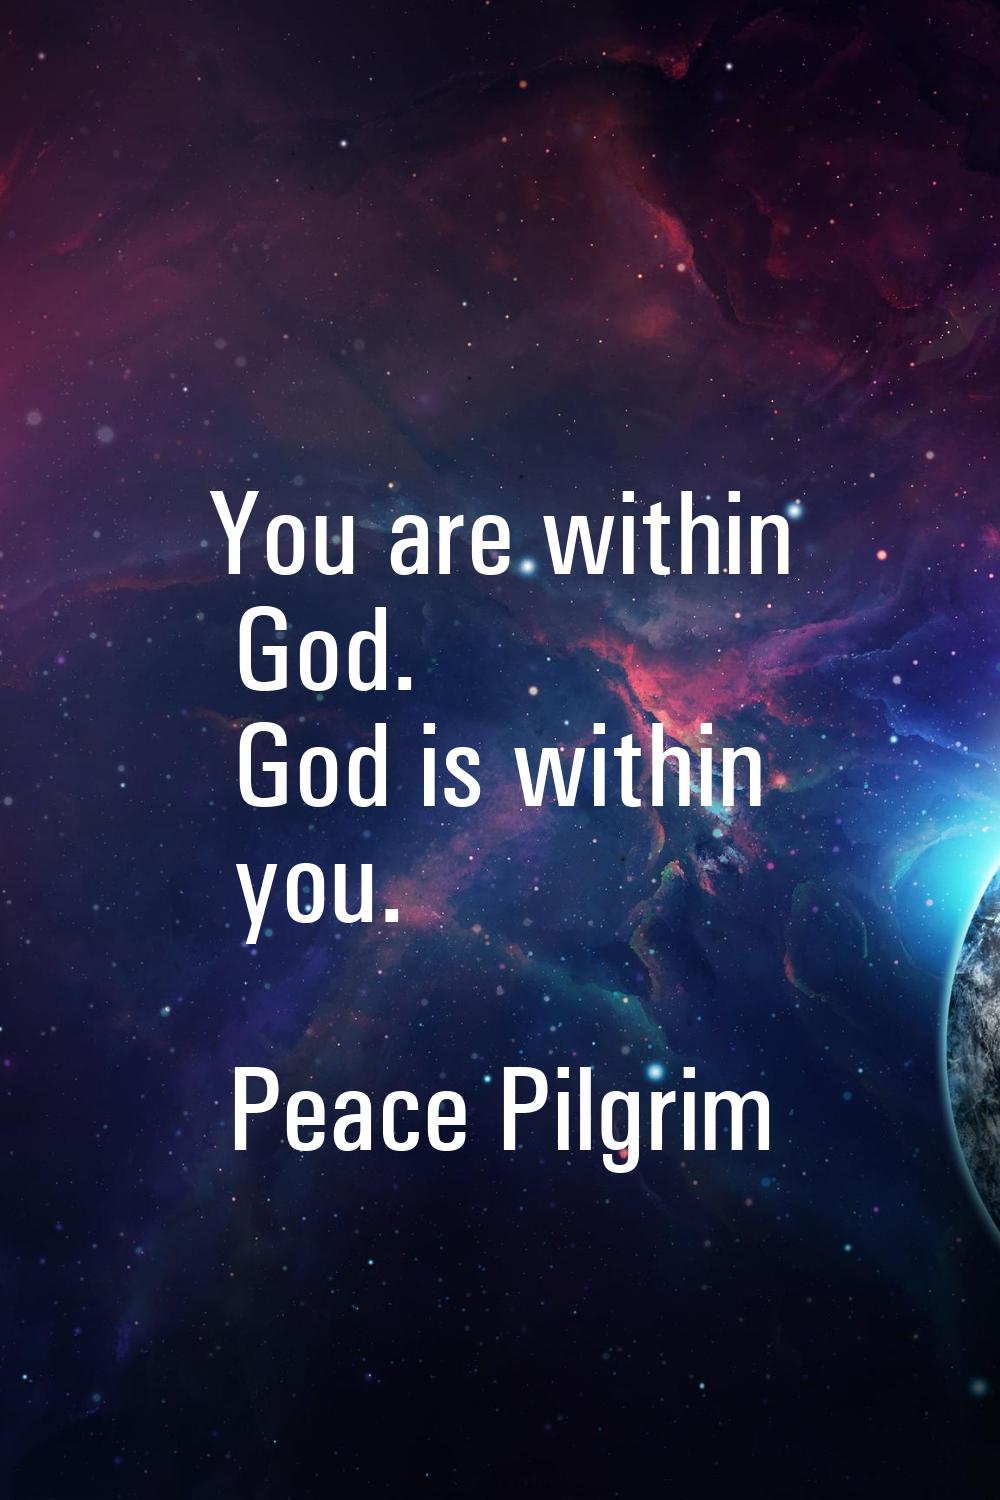 You are within God. God is within you.